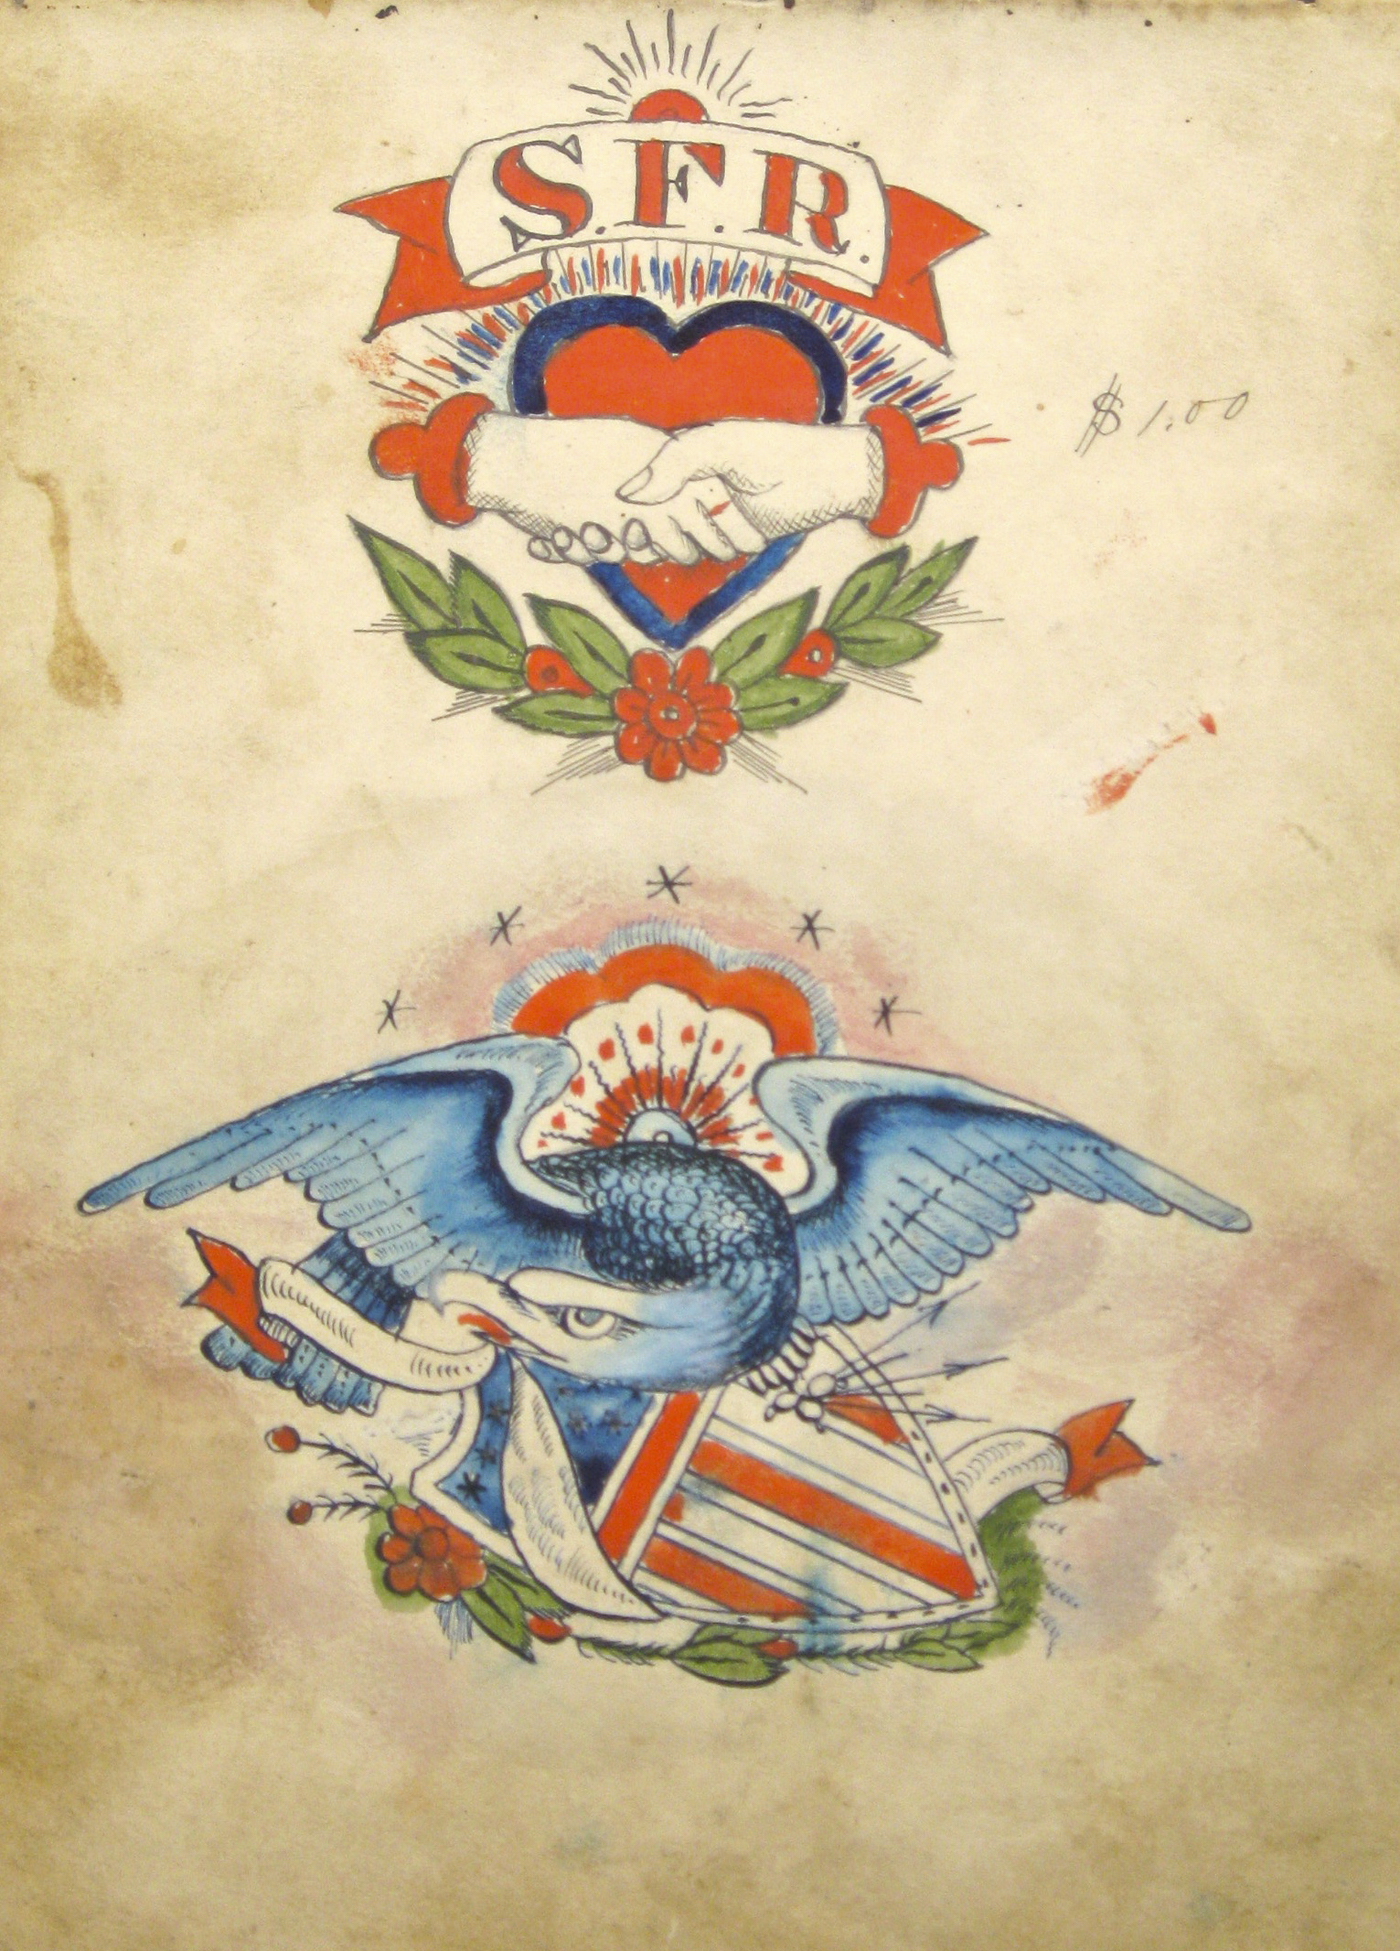  Samuel O’Reilly, “Eagle and shield” (1875–1905), watercolor, ink, and pencil on paper (collection of Lift Trucks Project) 